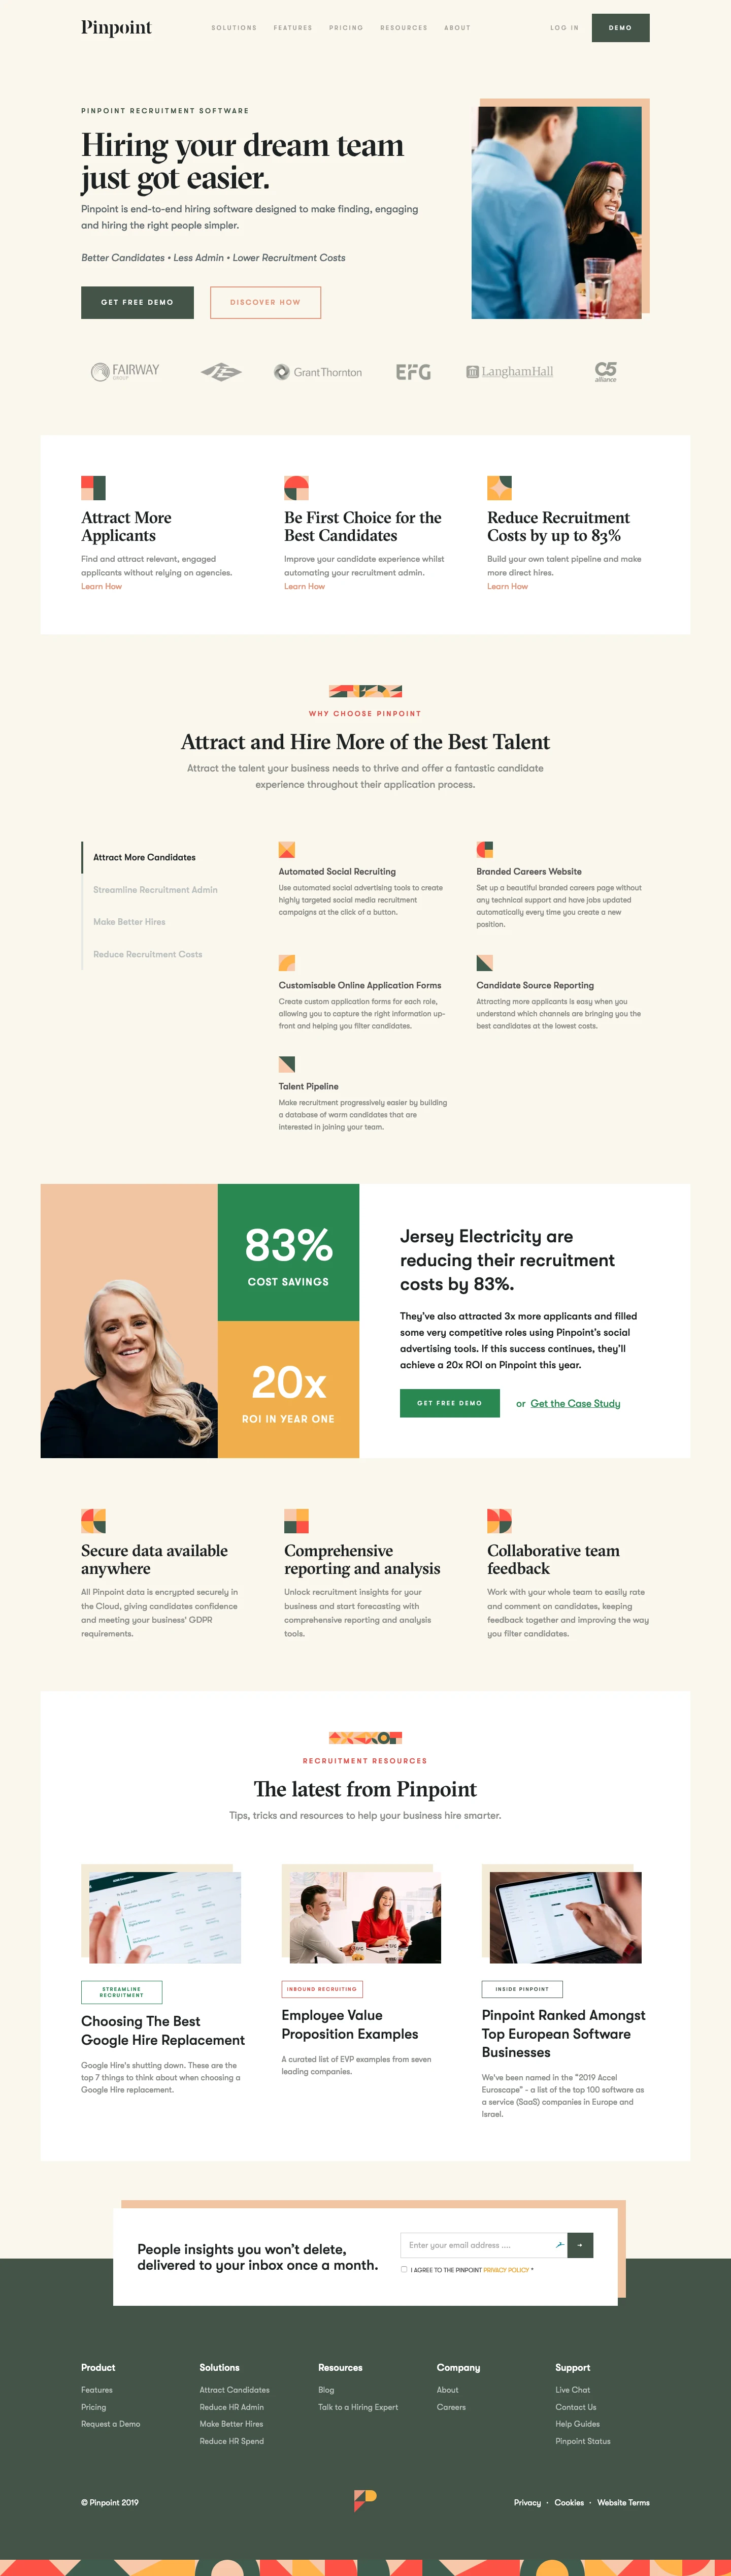 Pinpoint Landing Page Example: Pinpoint is end-to-end hiring software designed to make finding, engaging and hiring the right people simpler.